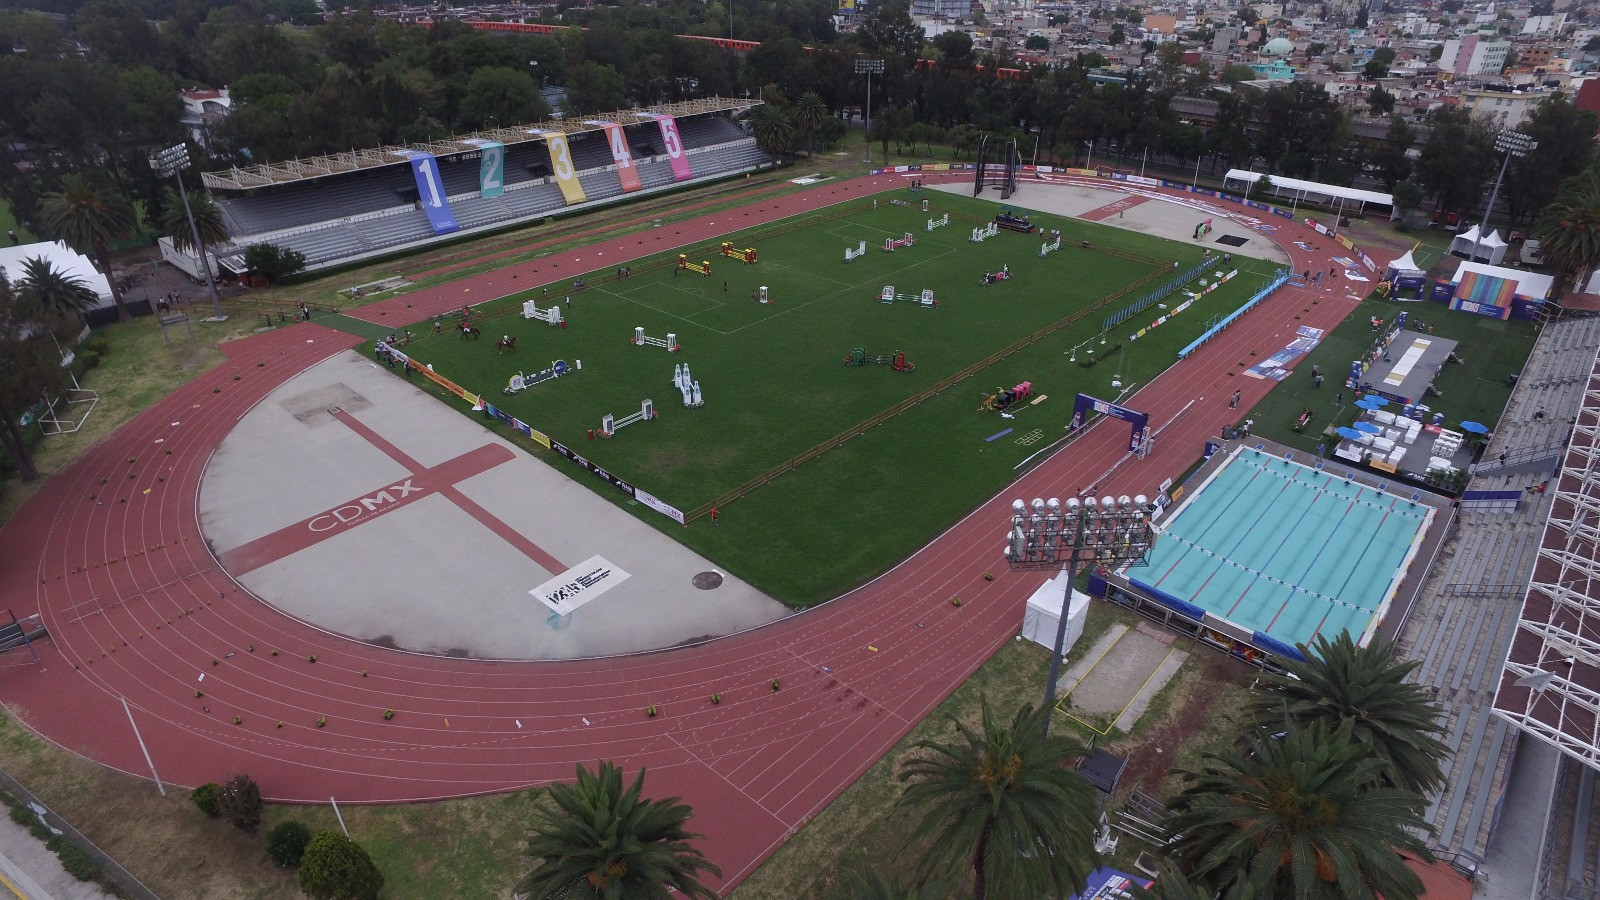 The Mexico City stadium contains all the necessary features to stage all five events of the modern pentathlon ©UIPM